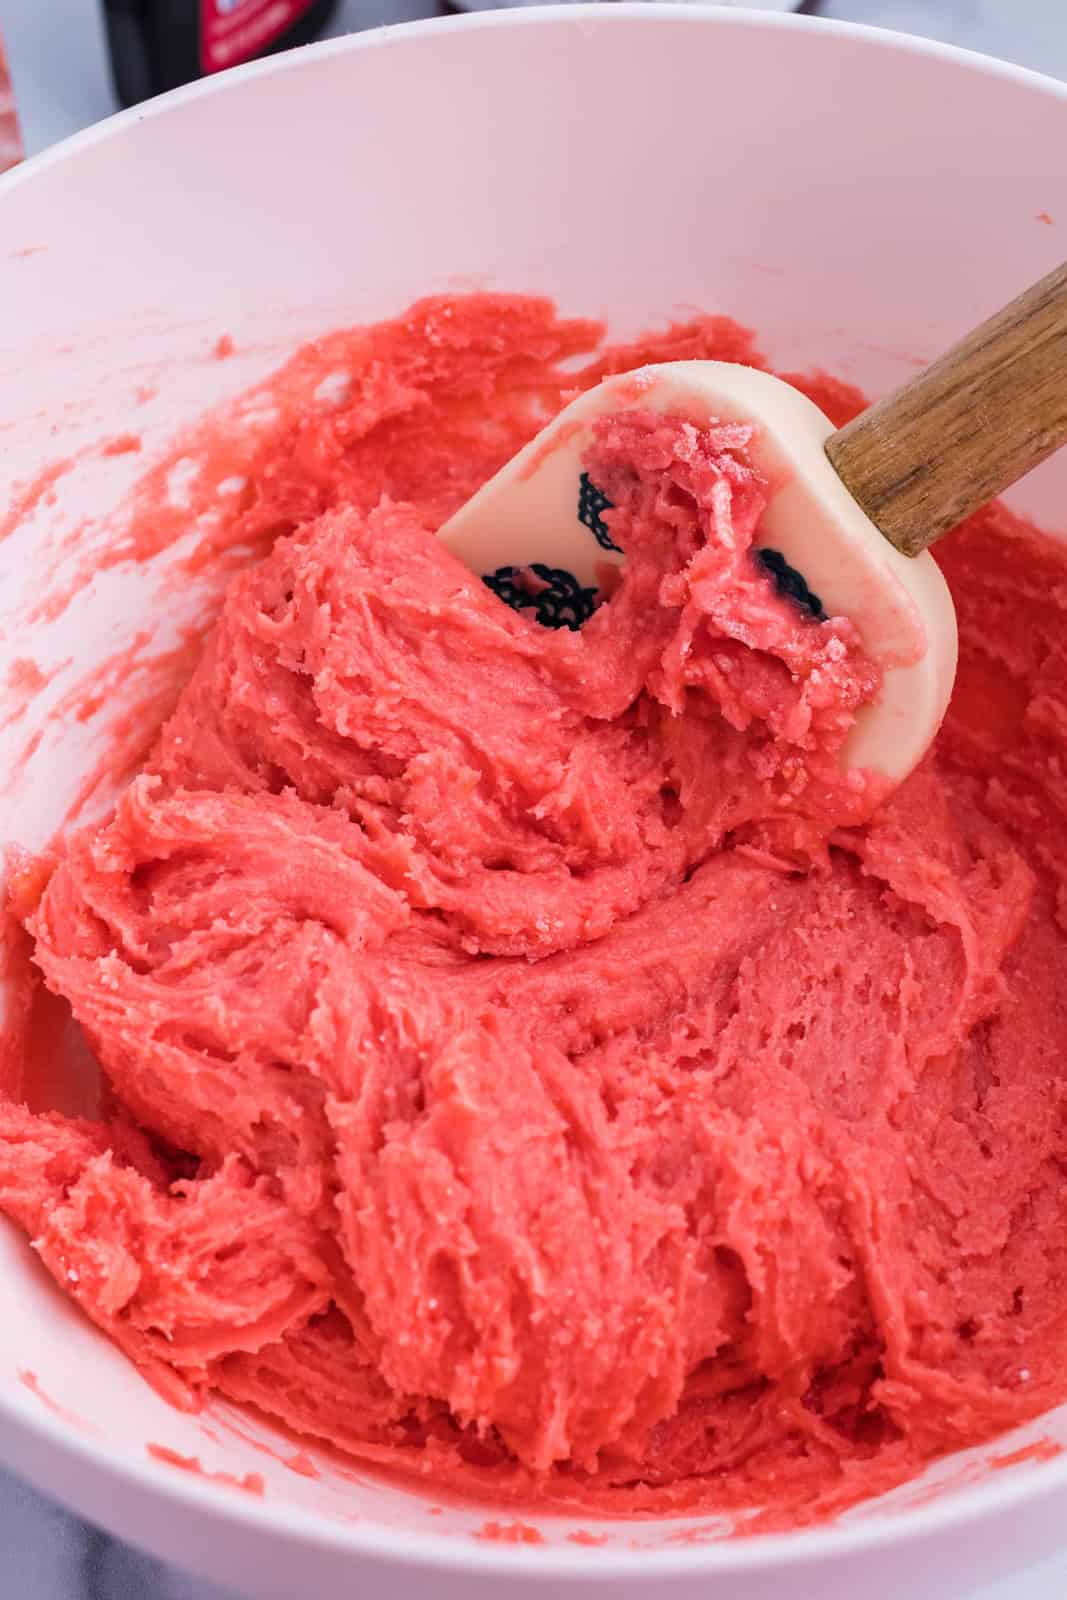 Pink brownie batter being mixed up in a mixing bowl.